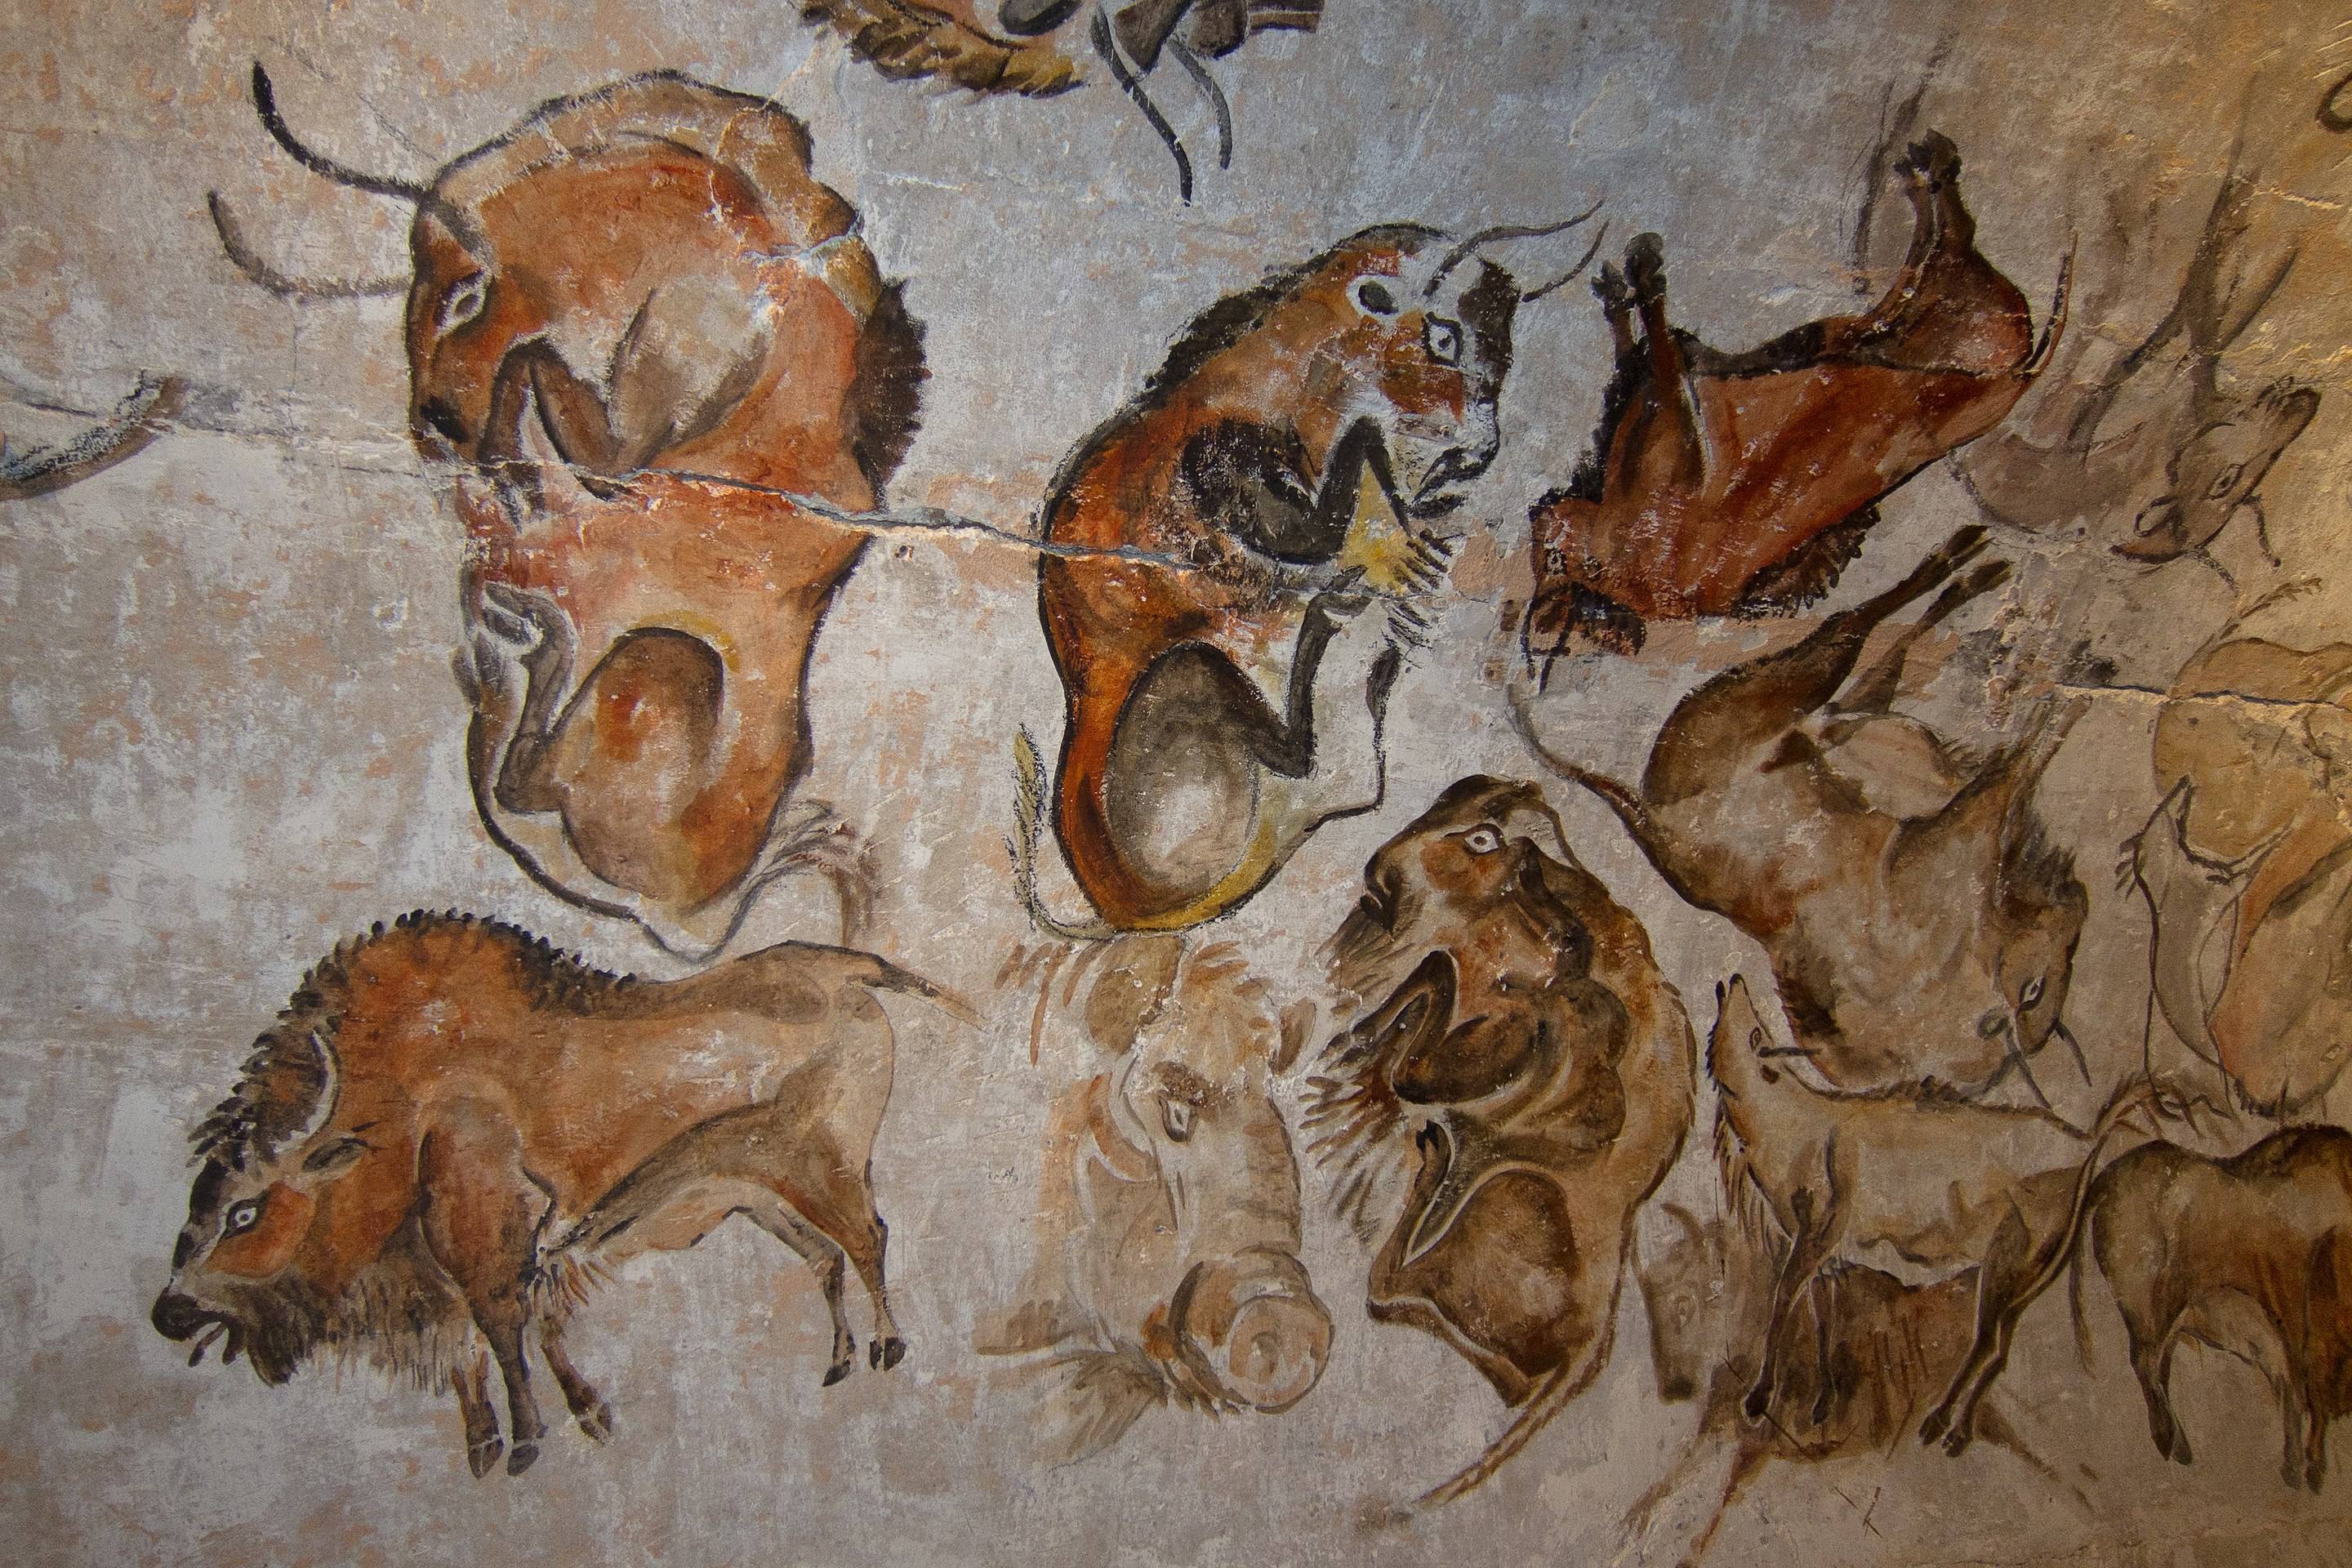 Replica of Palaeolithic cave paintings from the Altamira cave in Spain, painted c. 20,000 years ago